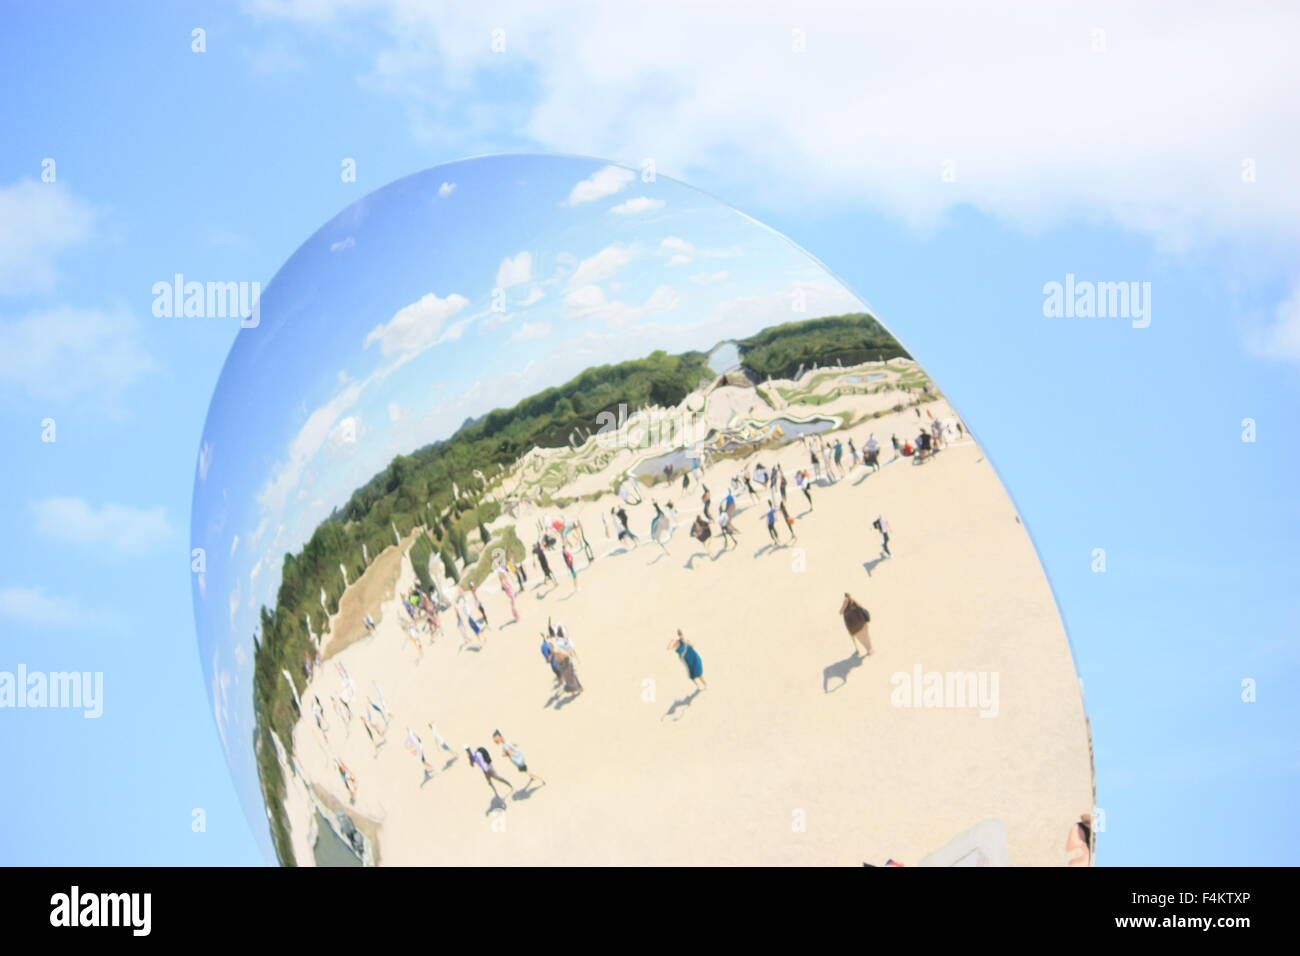 Reflections of unidentified tourists in the spherical mirror Stock Photo